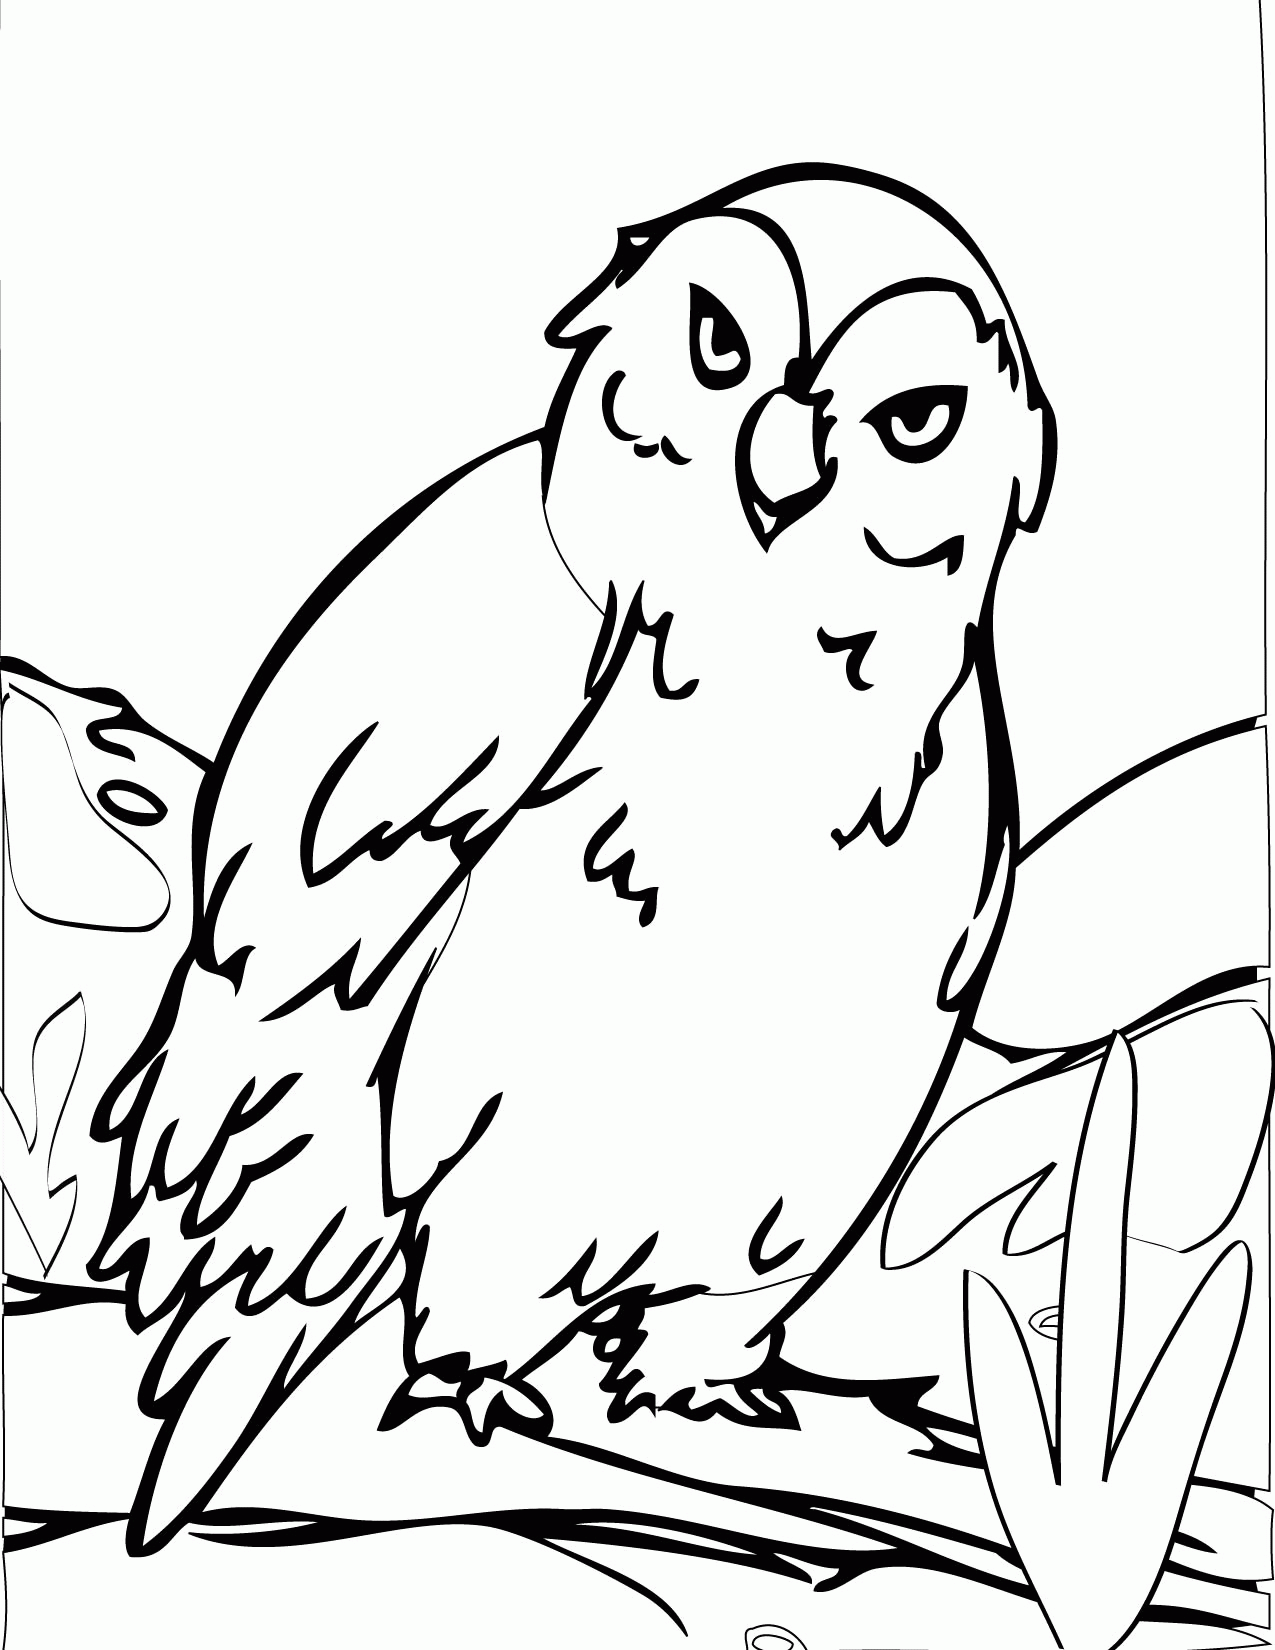 free-printable-arctic-animals-coloring-pages-coloring-home